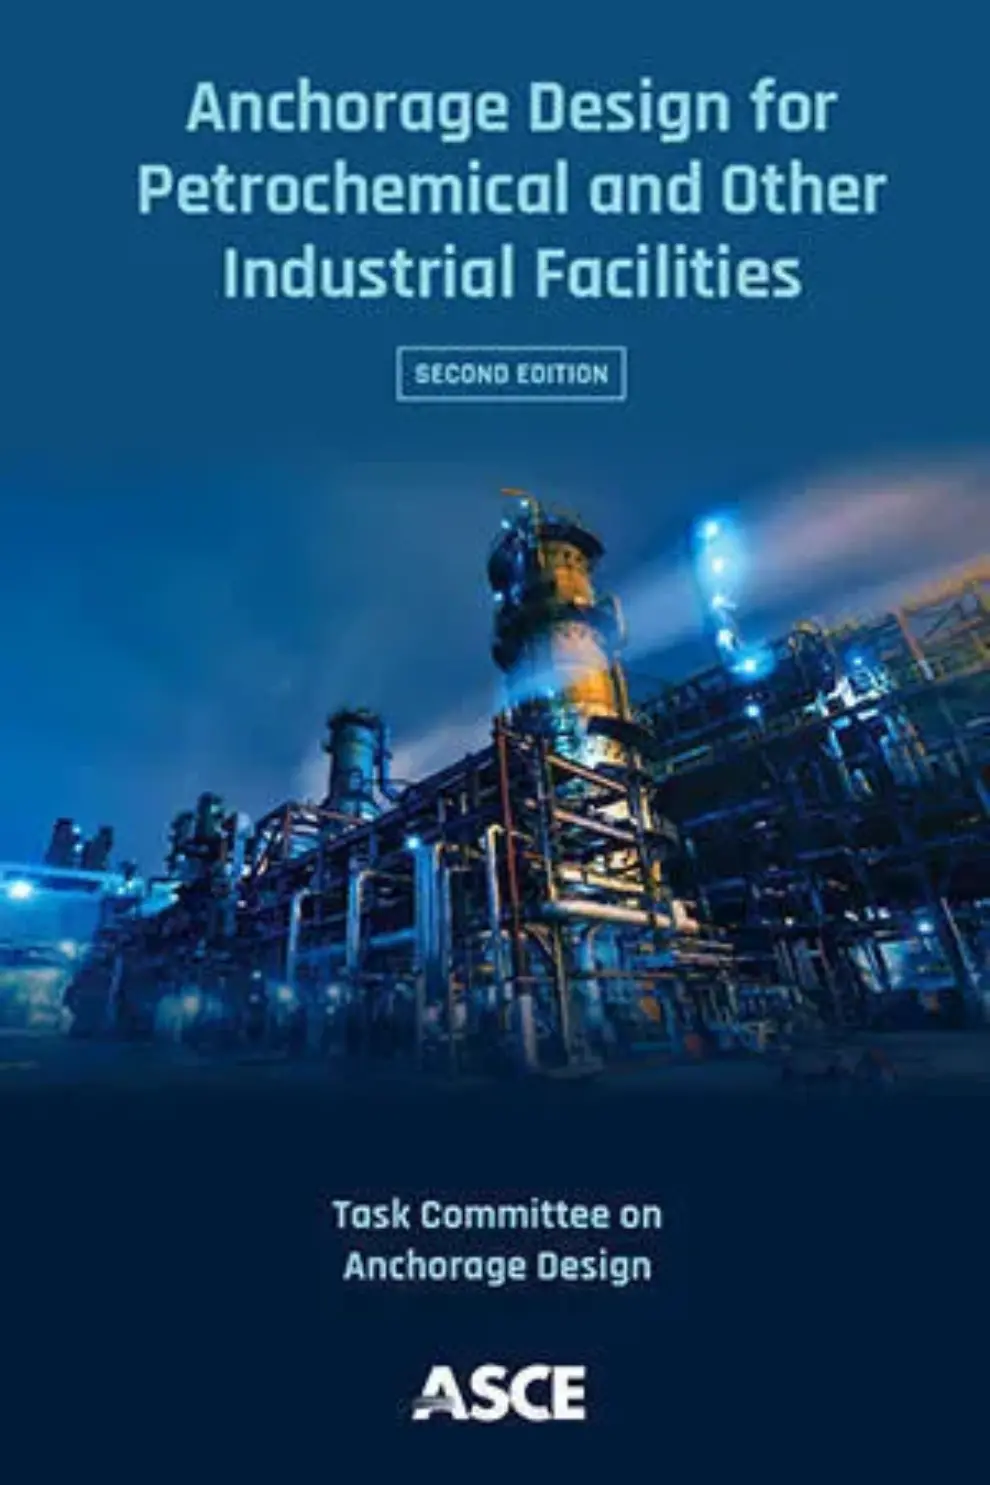 Updated ASCE Publication Provides Guidance on Anchorage Design for Industrial Facilities